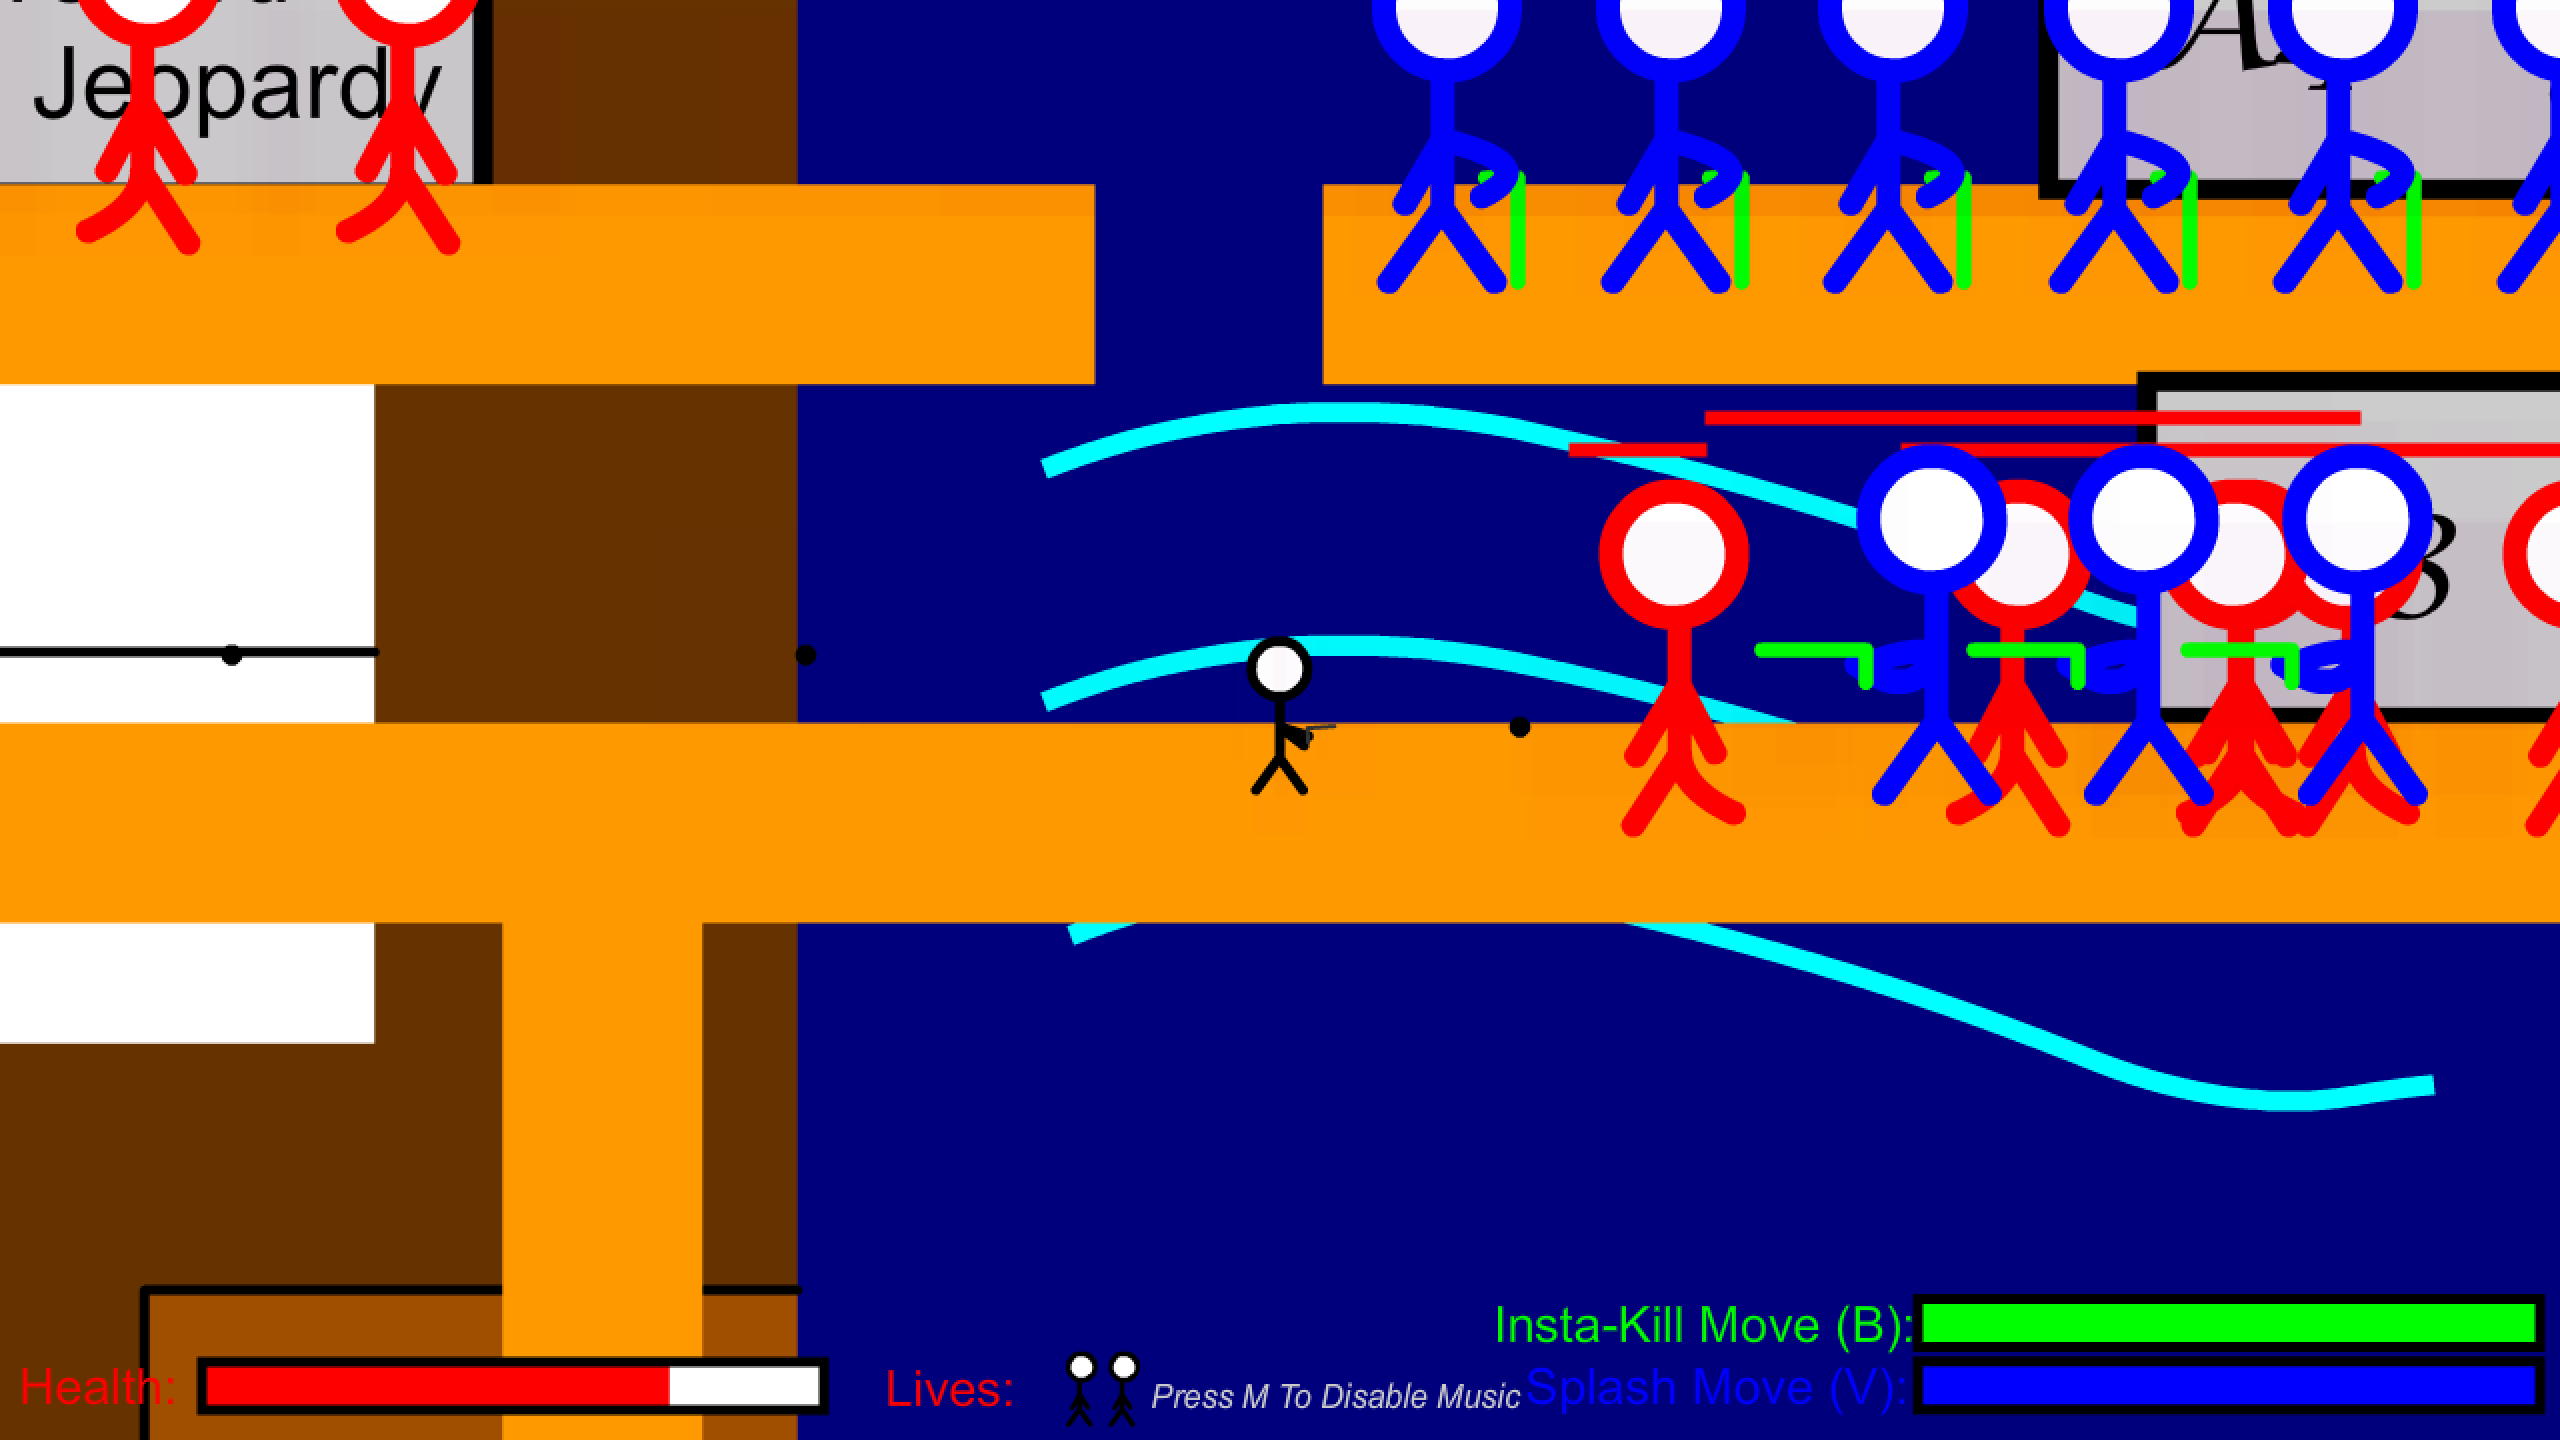 A screenshot from the game